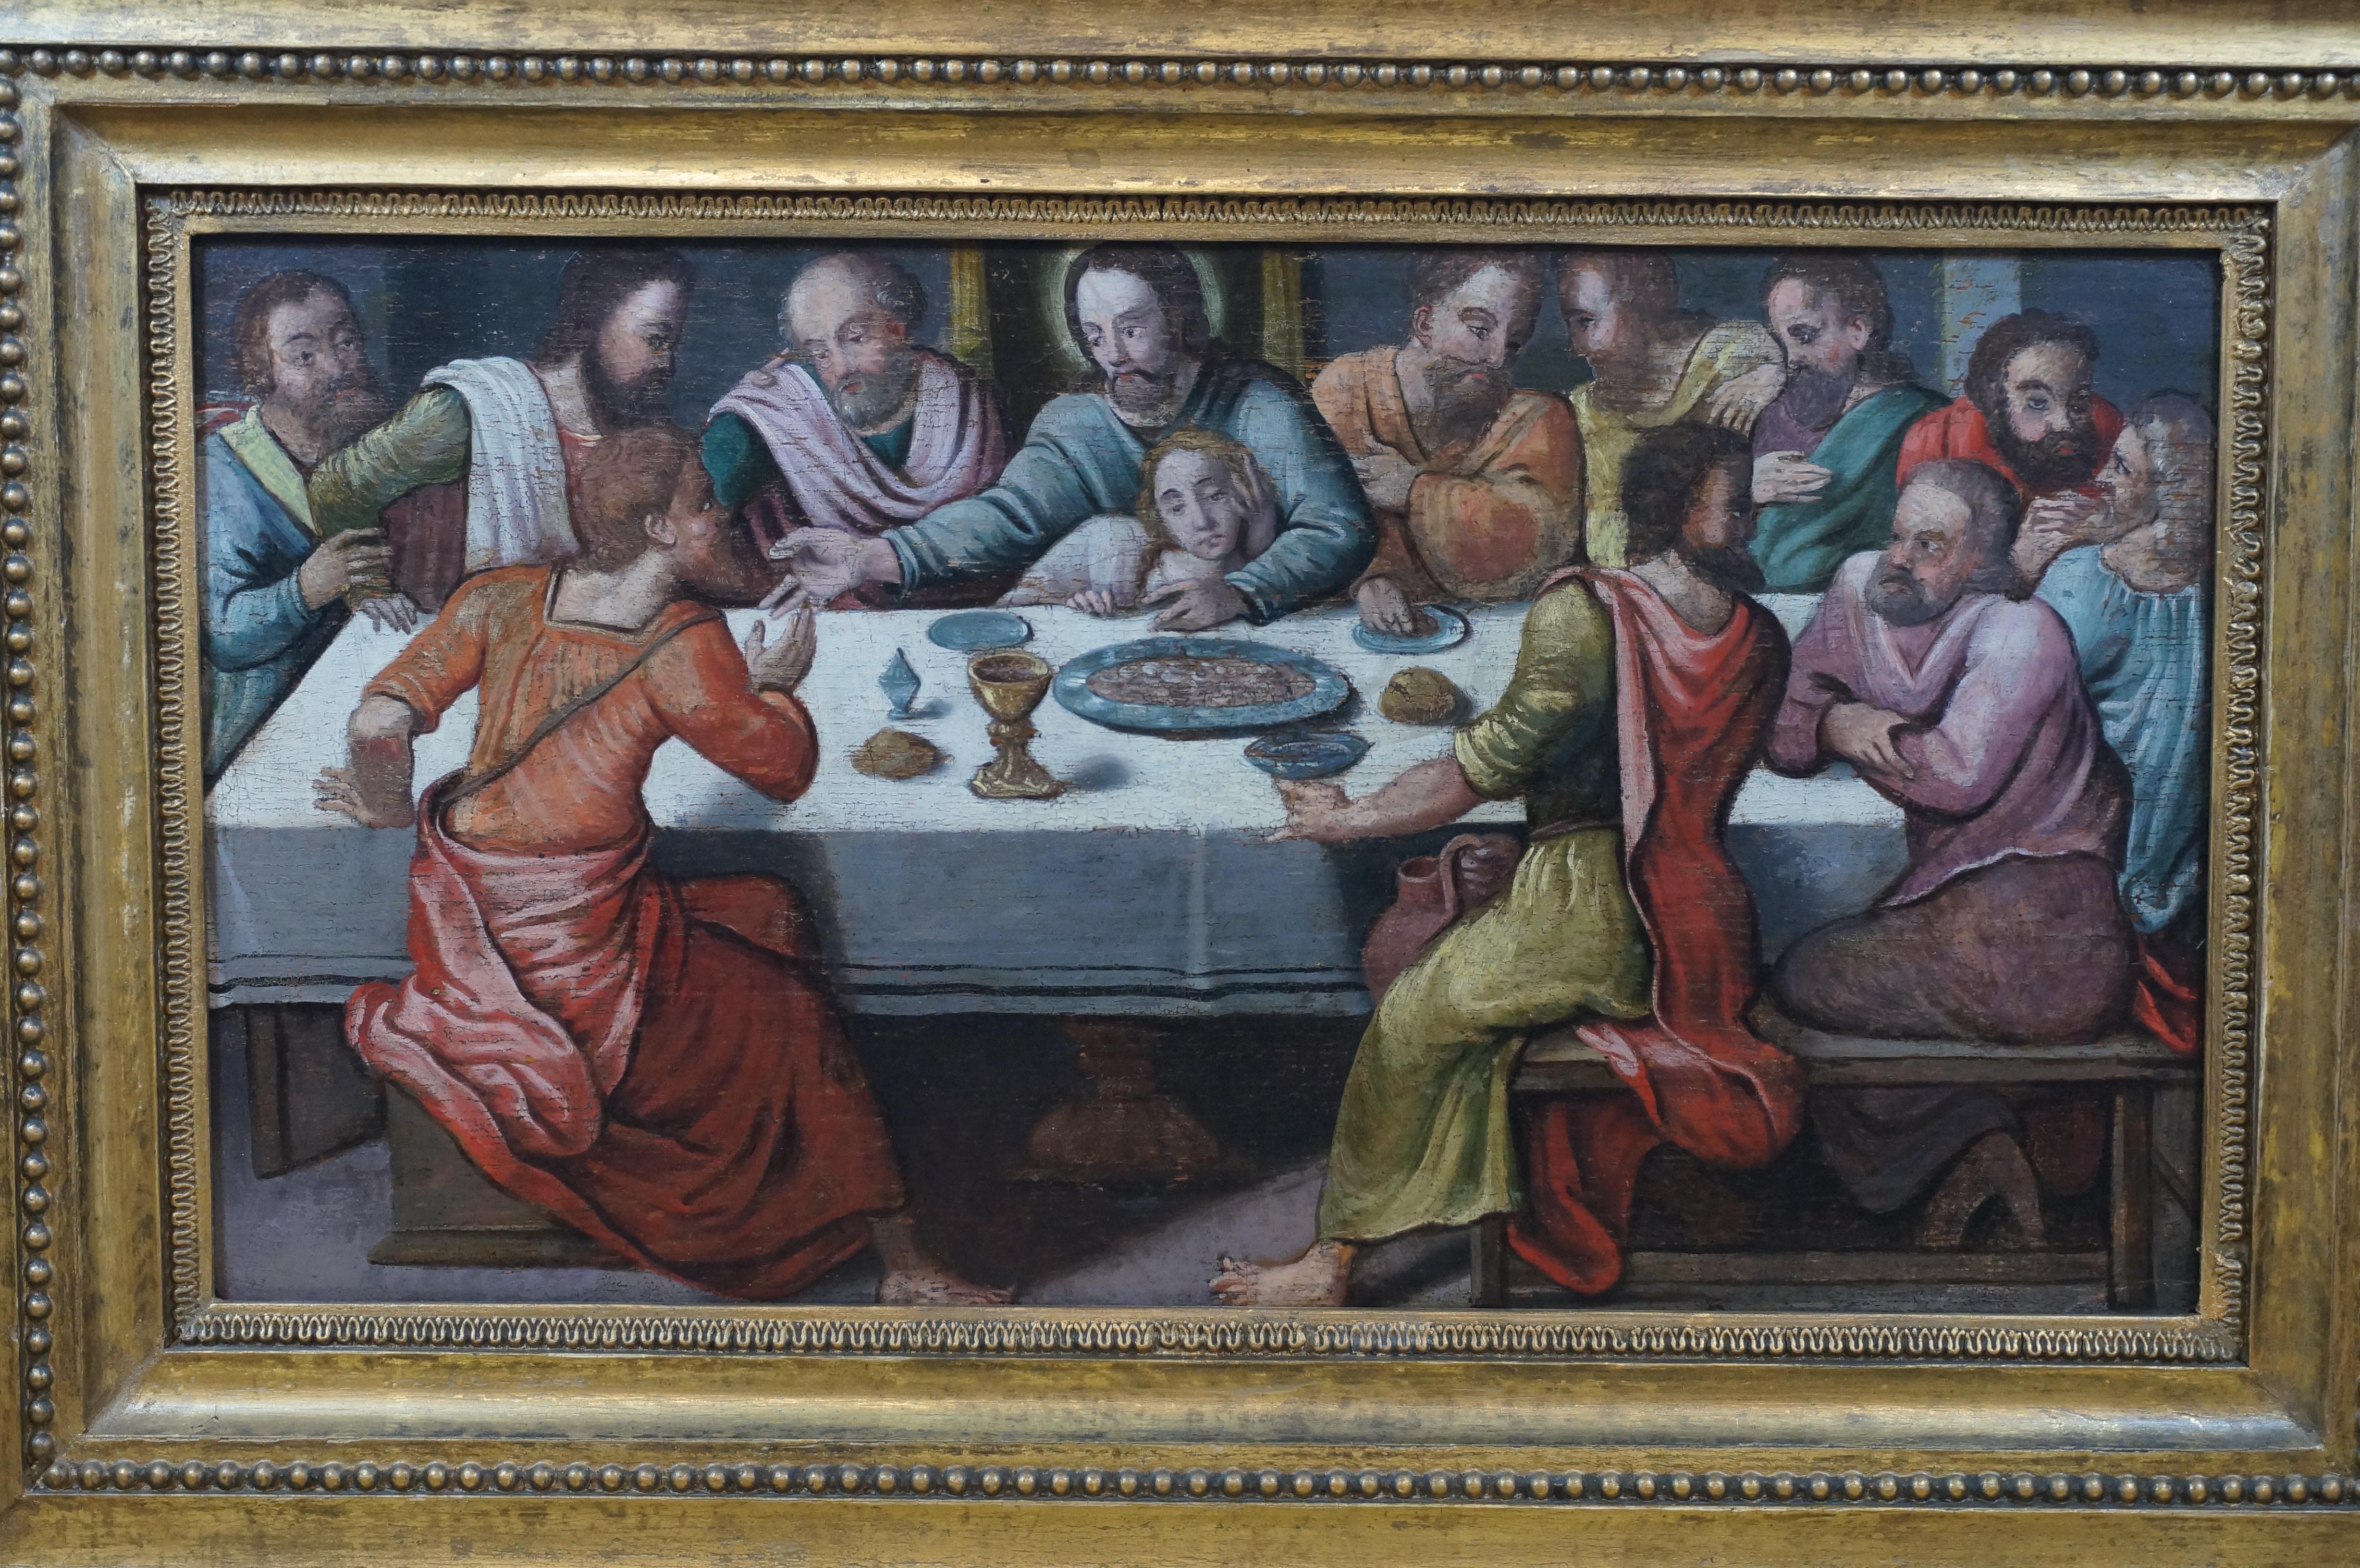 Anrique oil painting, Last Supper, German school, Renaissance, Late 16th c. - Brown Figurative Painting by Unknown